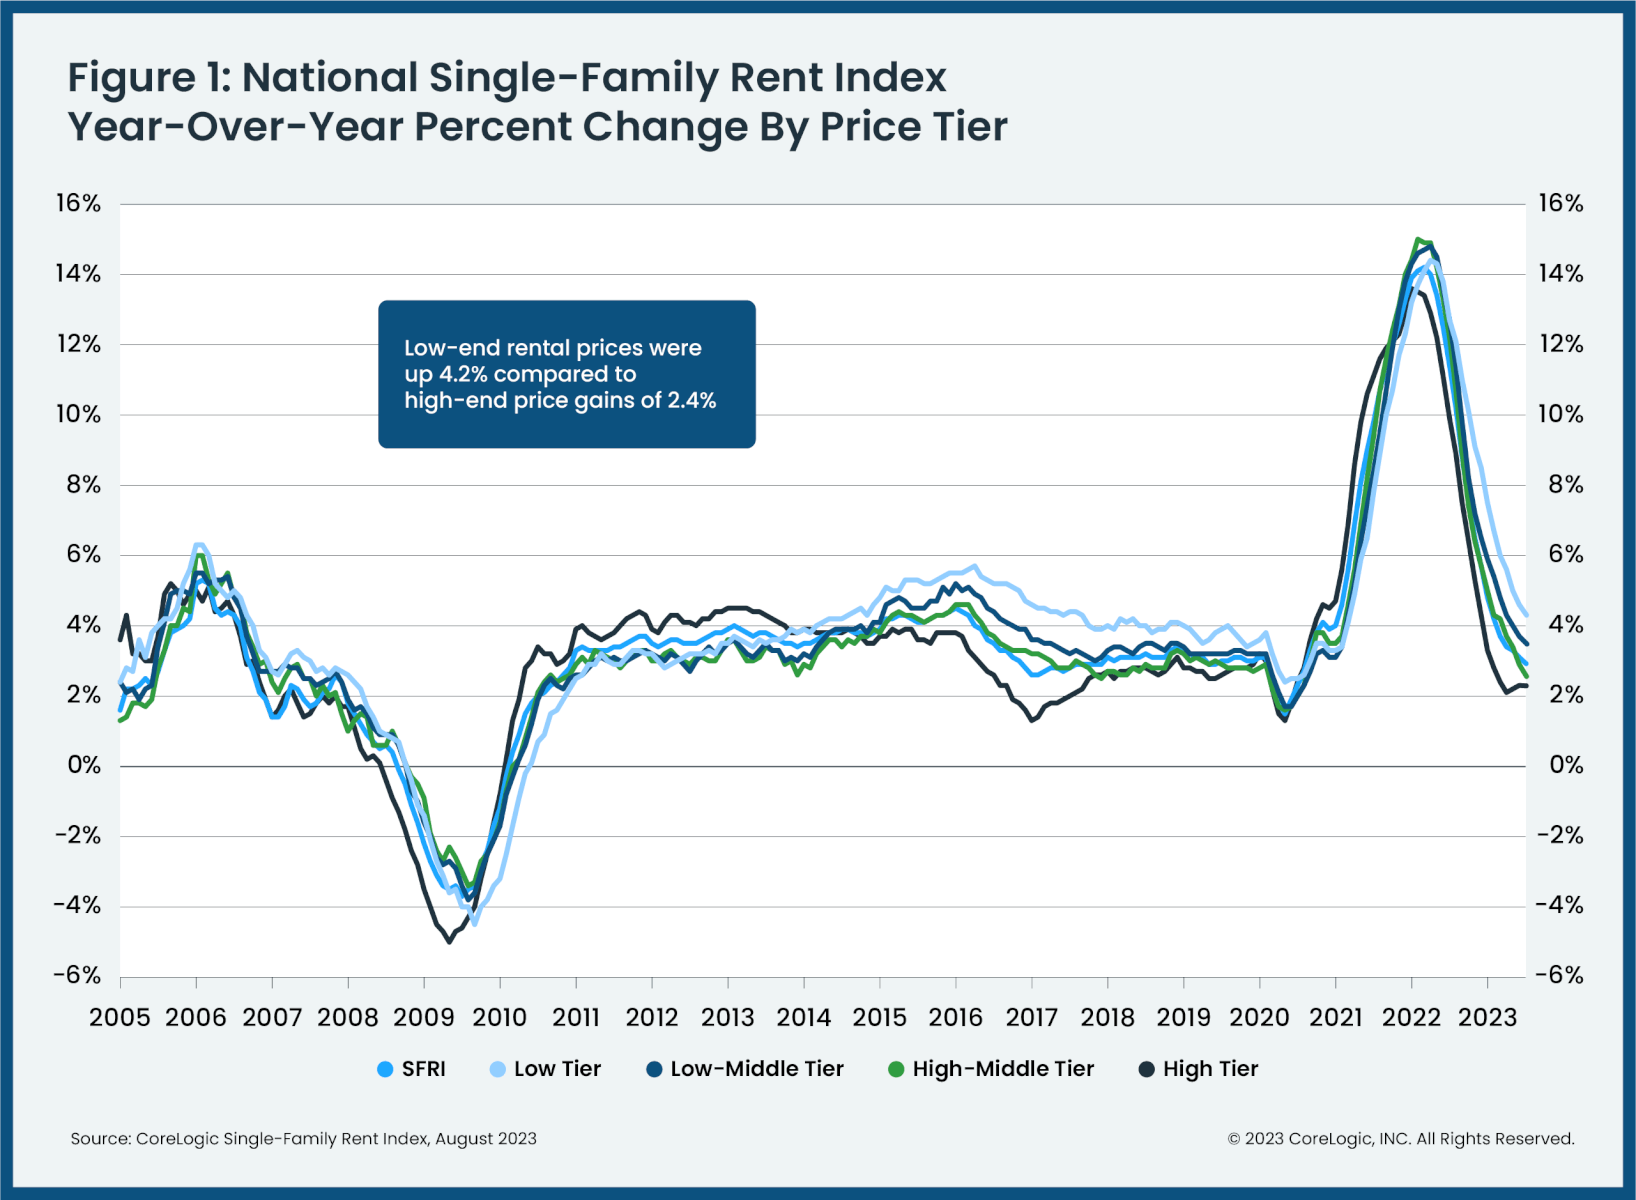 U.S. single-family rent changes by price tier: 2005 - 2023